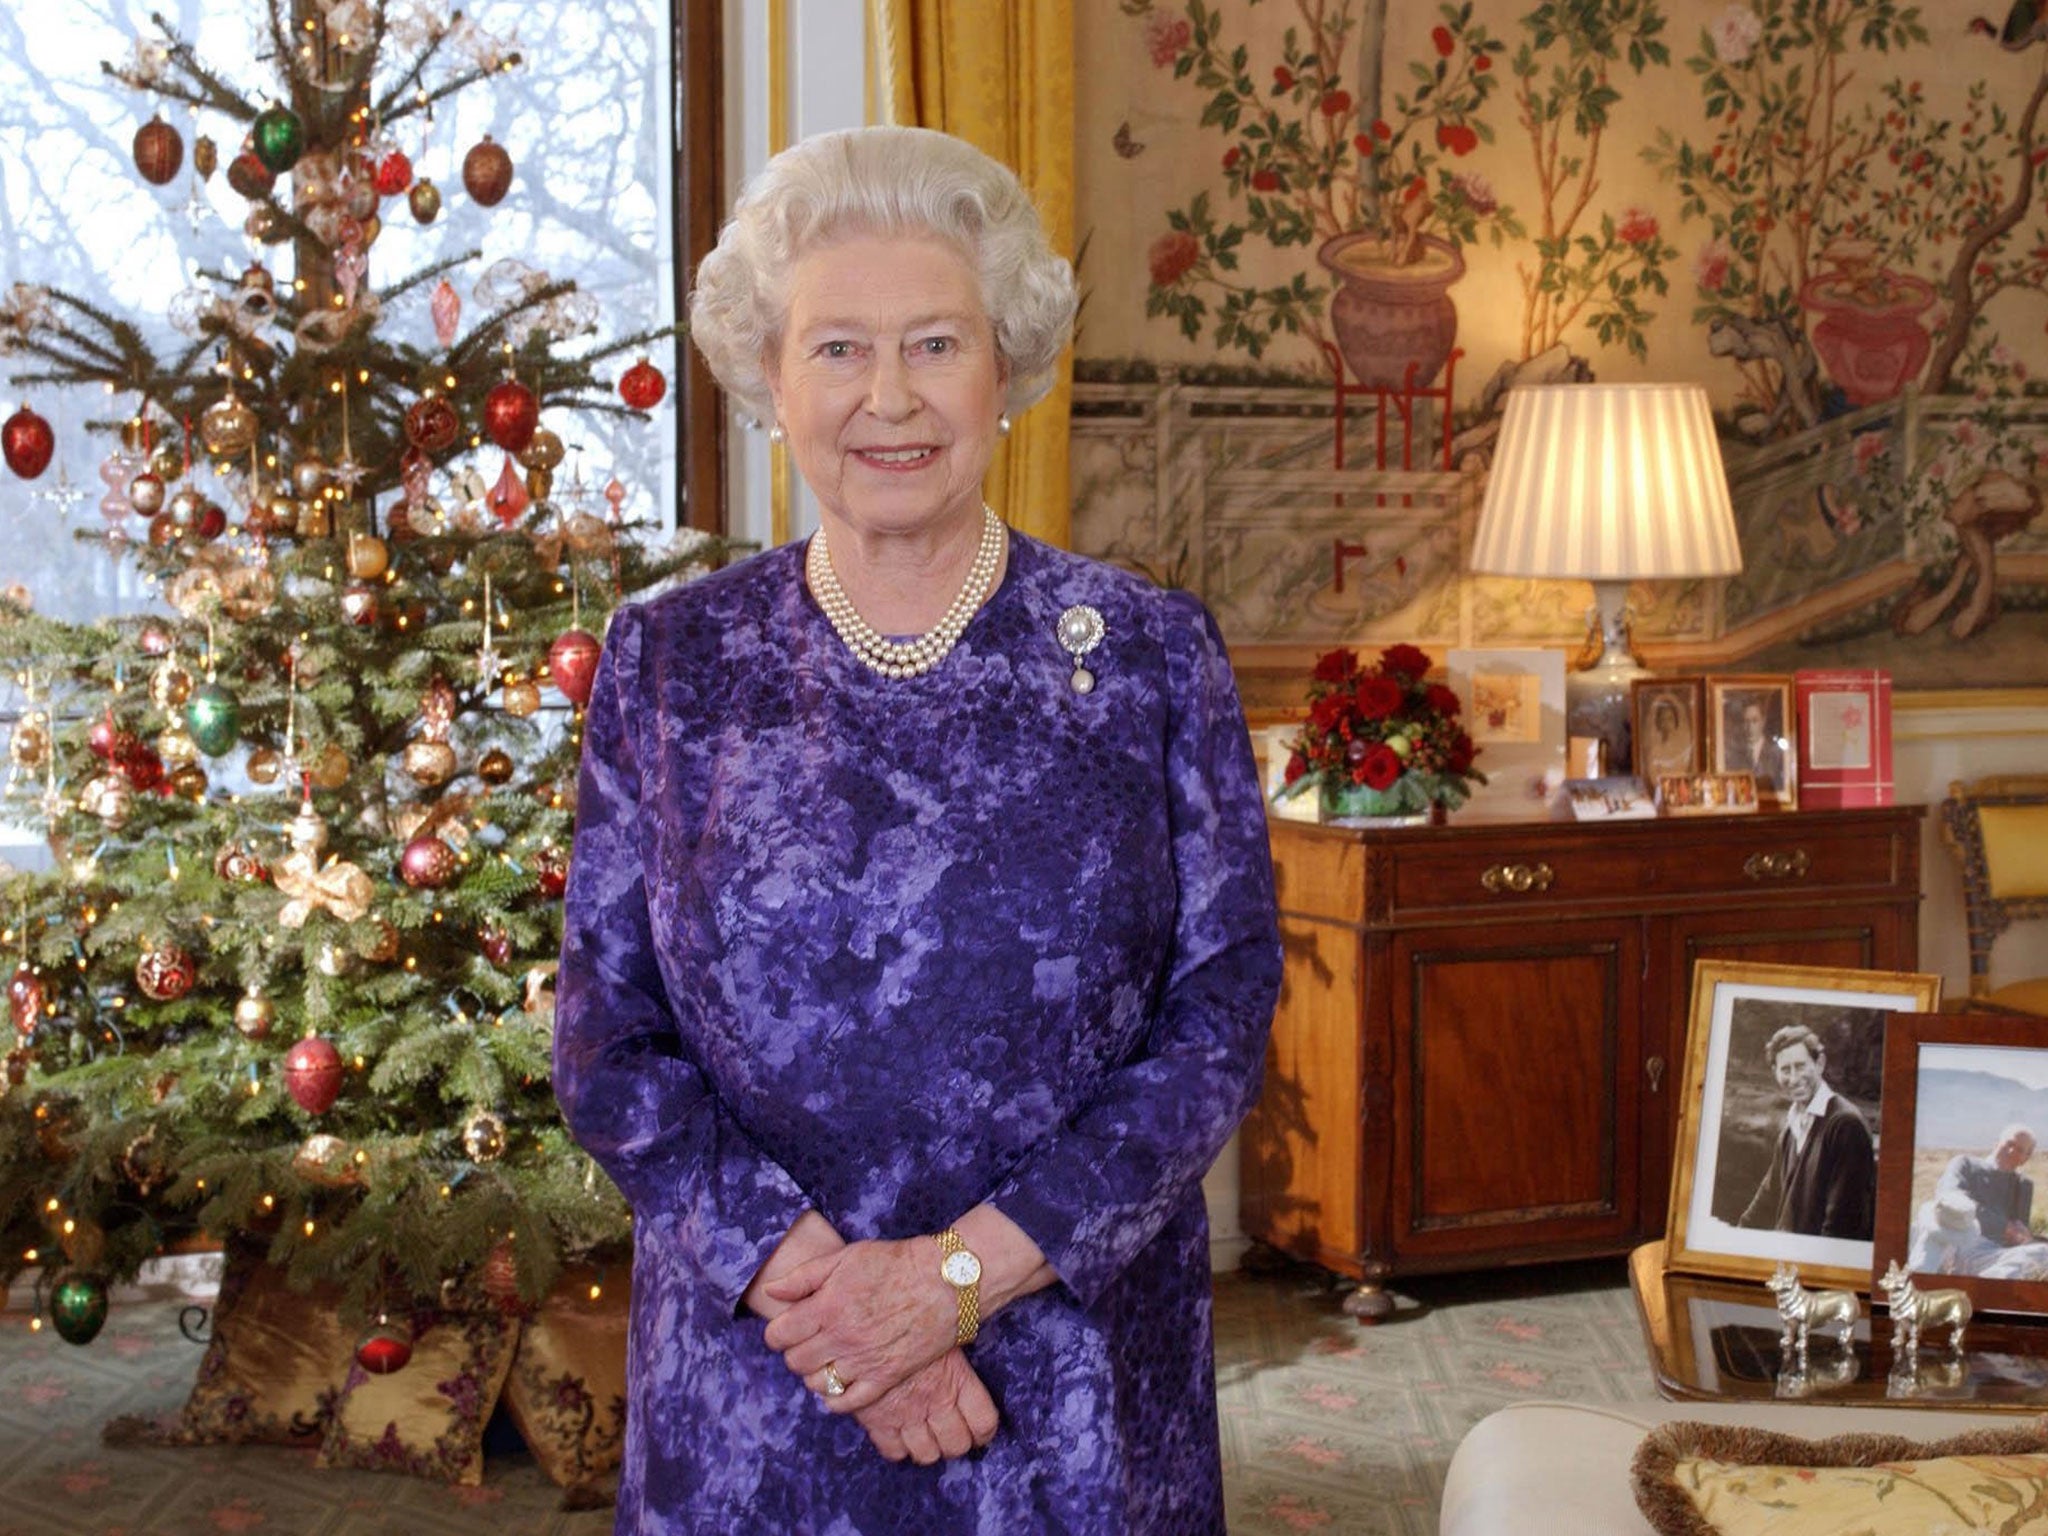 Queen Elizabeth II records her Christmas Day message in the Yellow Drawing Room at Buckingham Palace on 24 December, 2004 in London